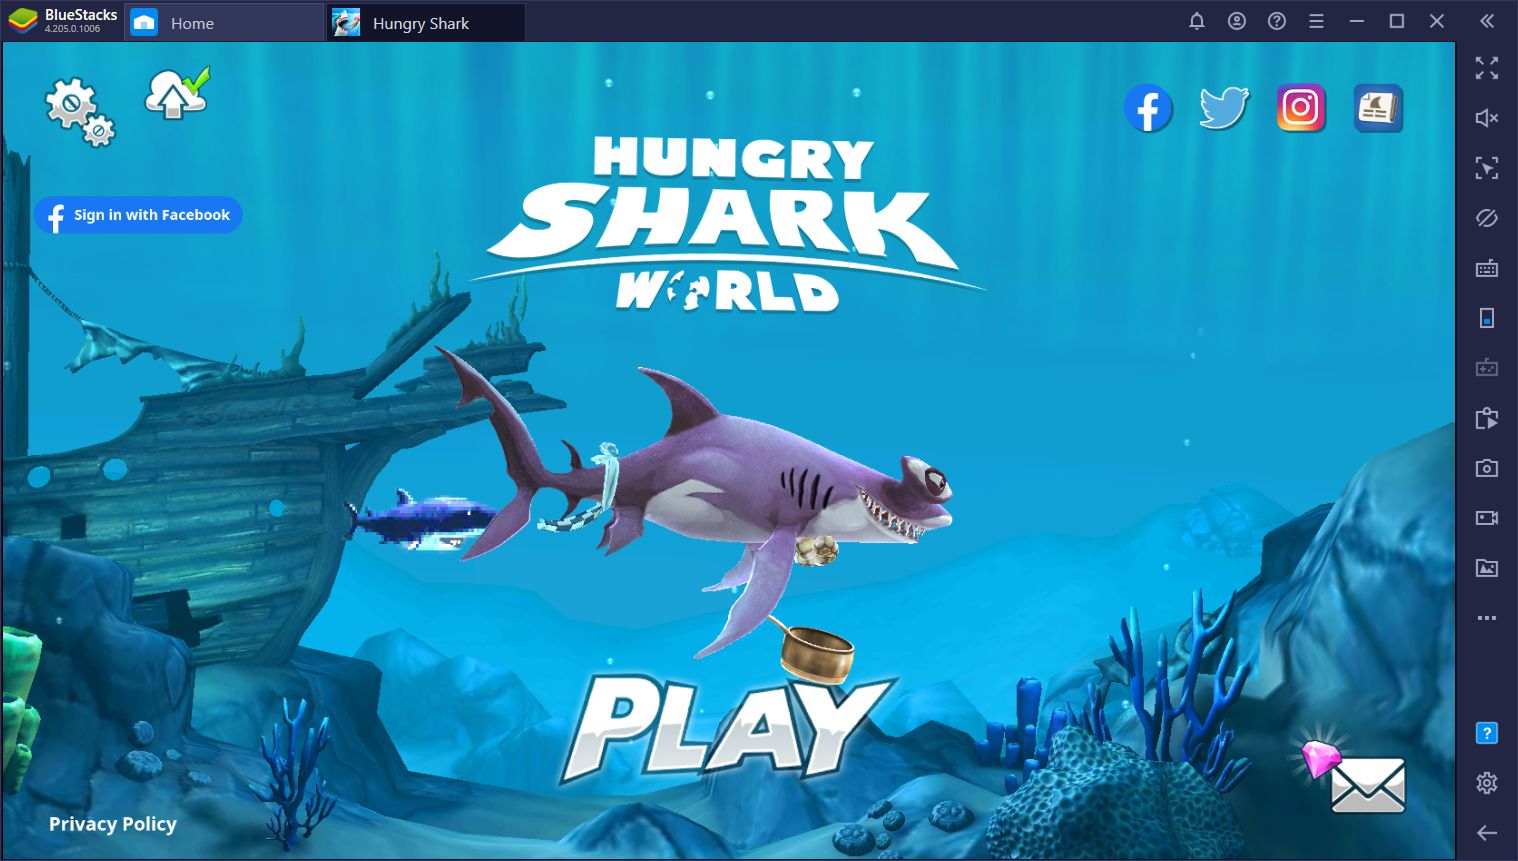 Hungry Shark World Hack Tool Generator 2021 Get MOD, Unlimited Money) Free Download No Survey